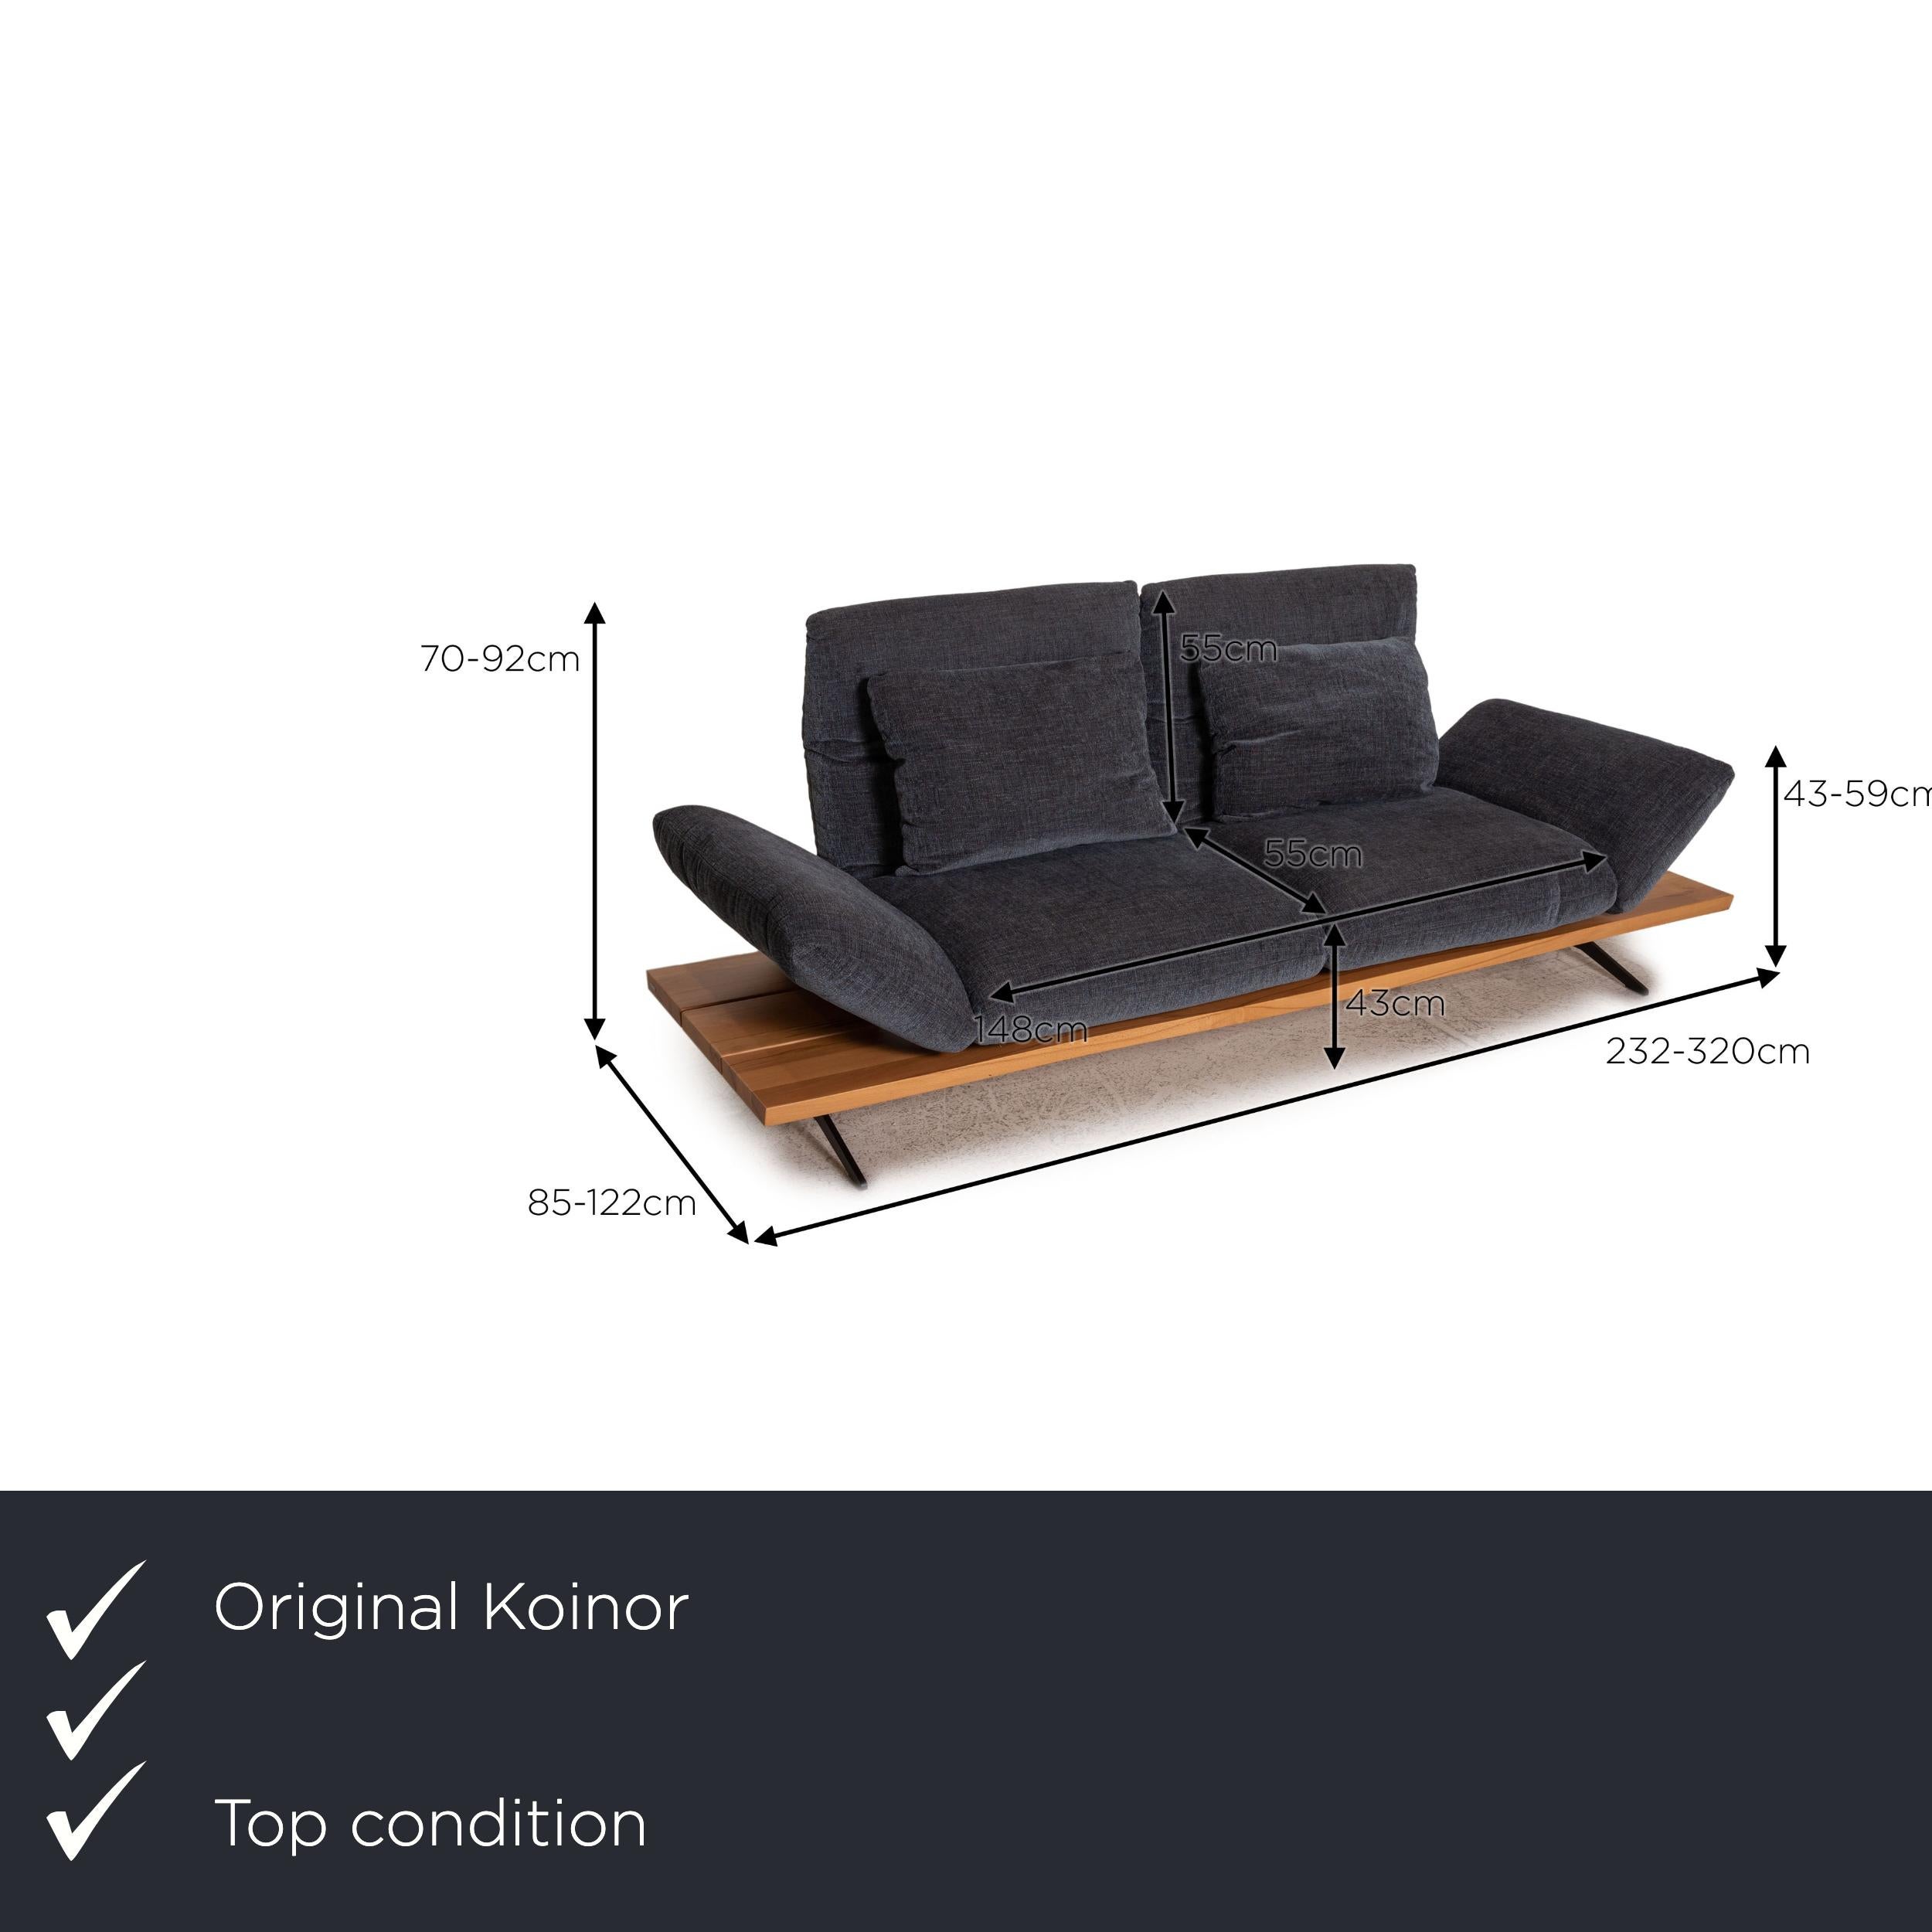 We present to you a Koinor Marylin Fabric sofa blue two seater couch function.

Product measurements in centimeters:

depth: 85
width: 232
height: 70
seat height: 43
rest height: 43
seat depth: 55
seat width: 148
back height: 55.

 